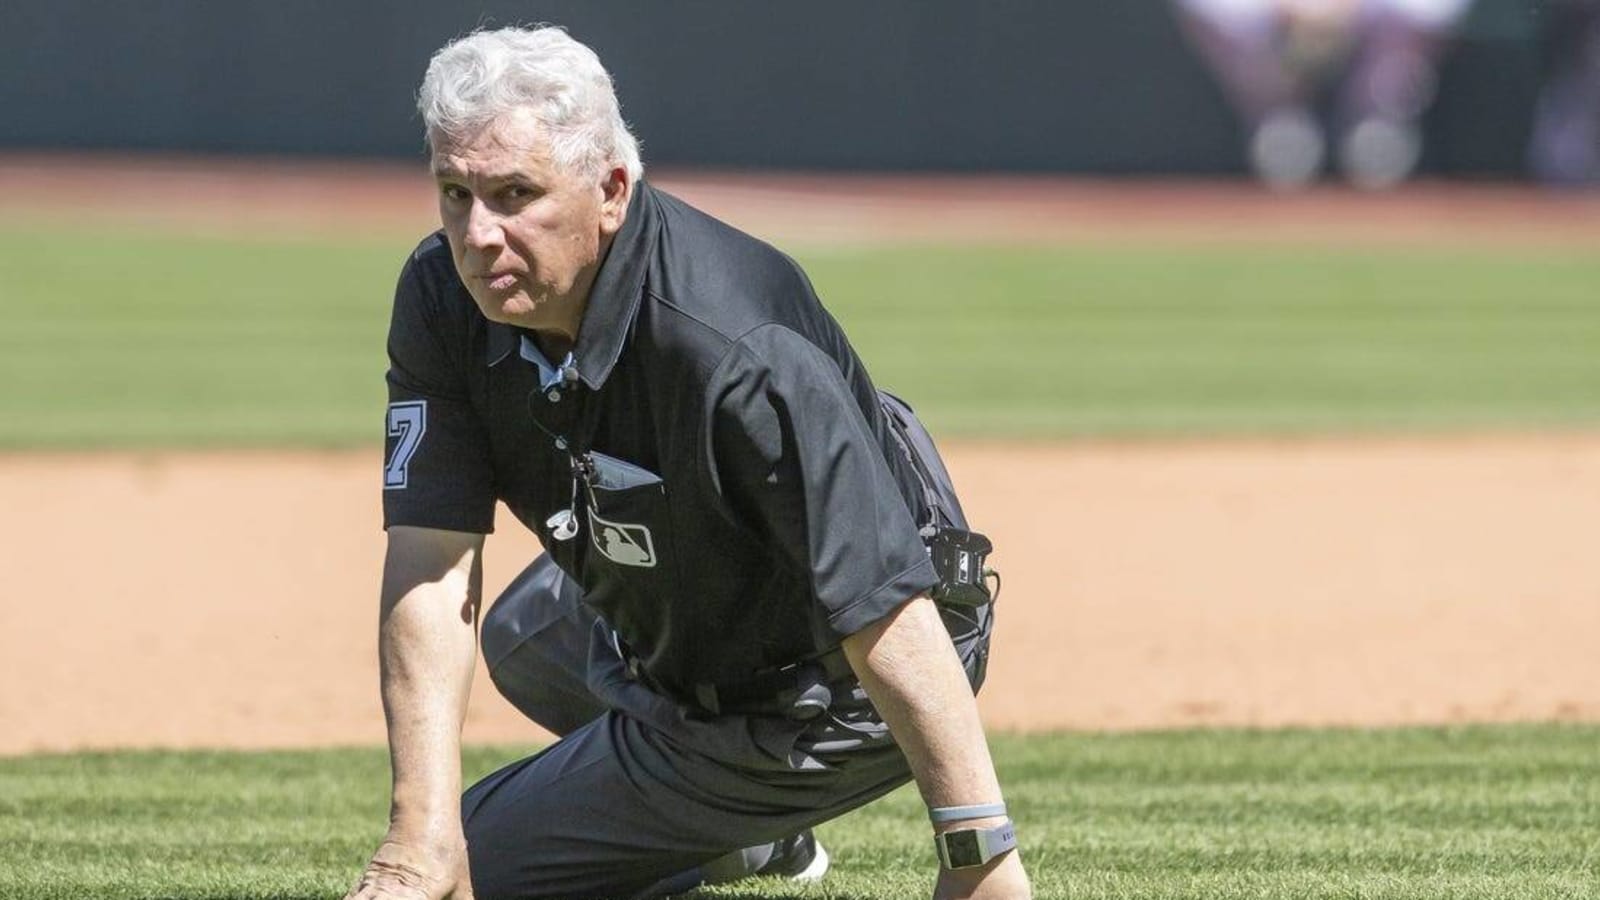 Ump Larry Vanover hit in head by throw, leaves game